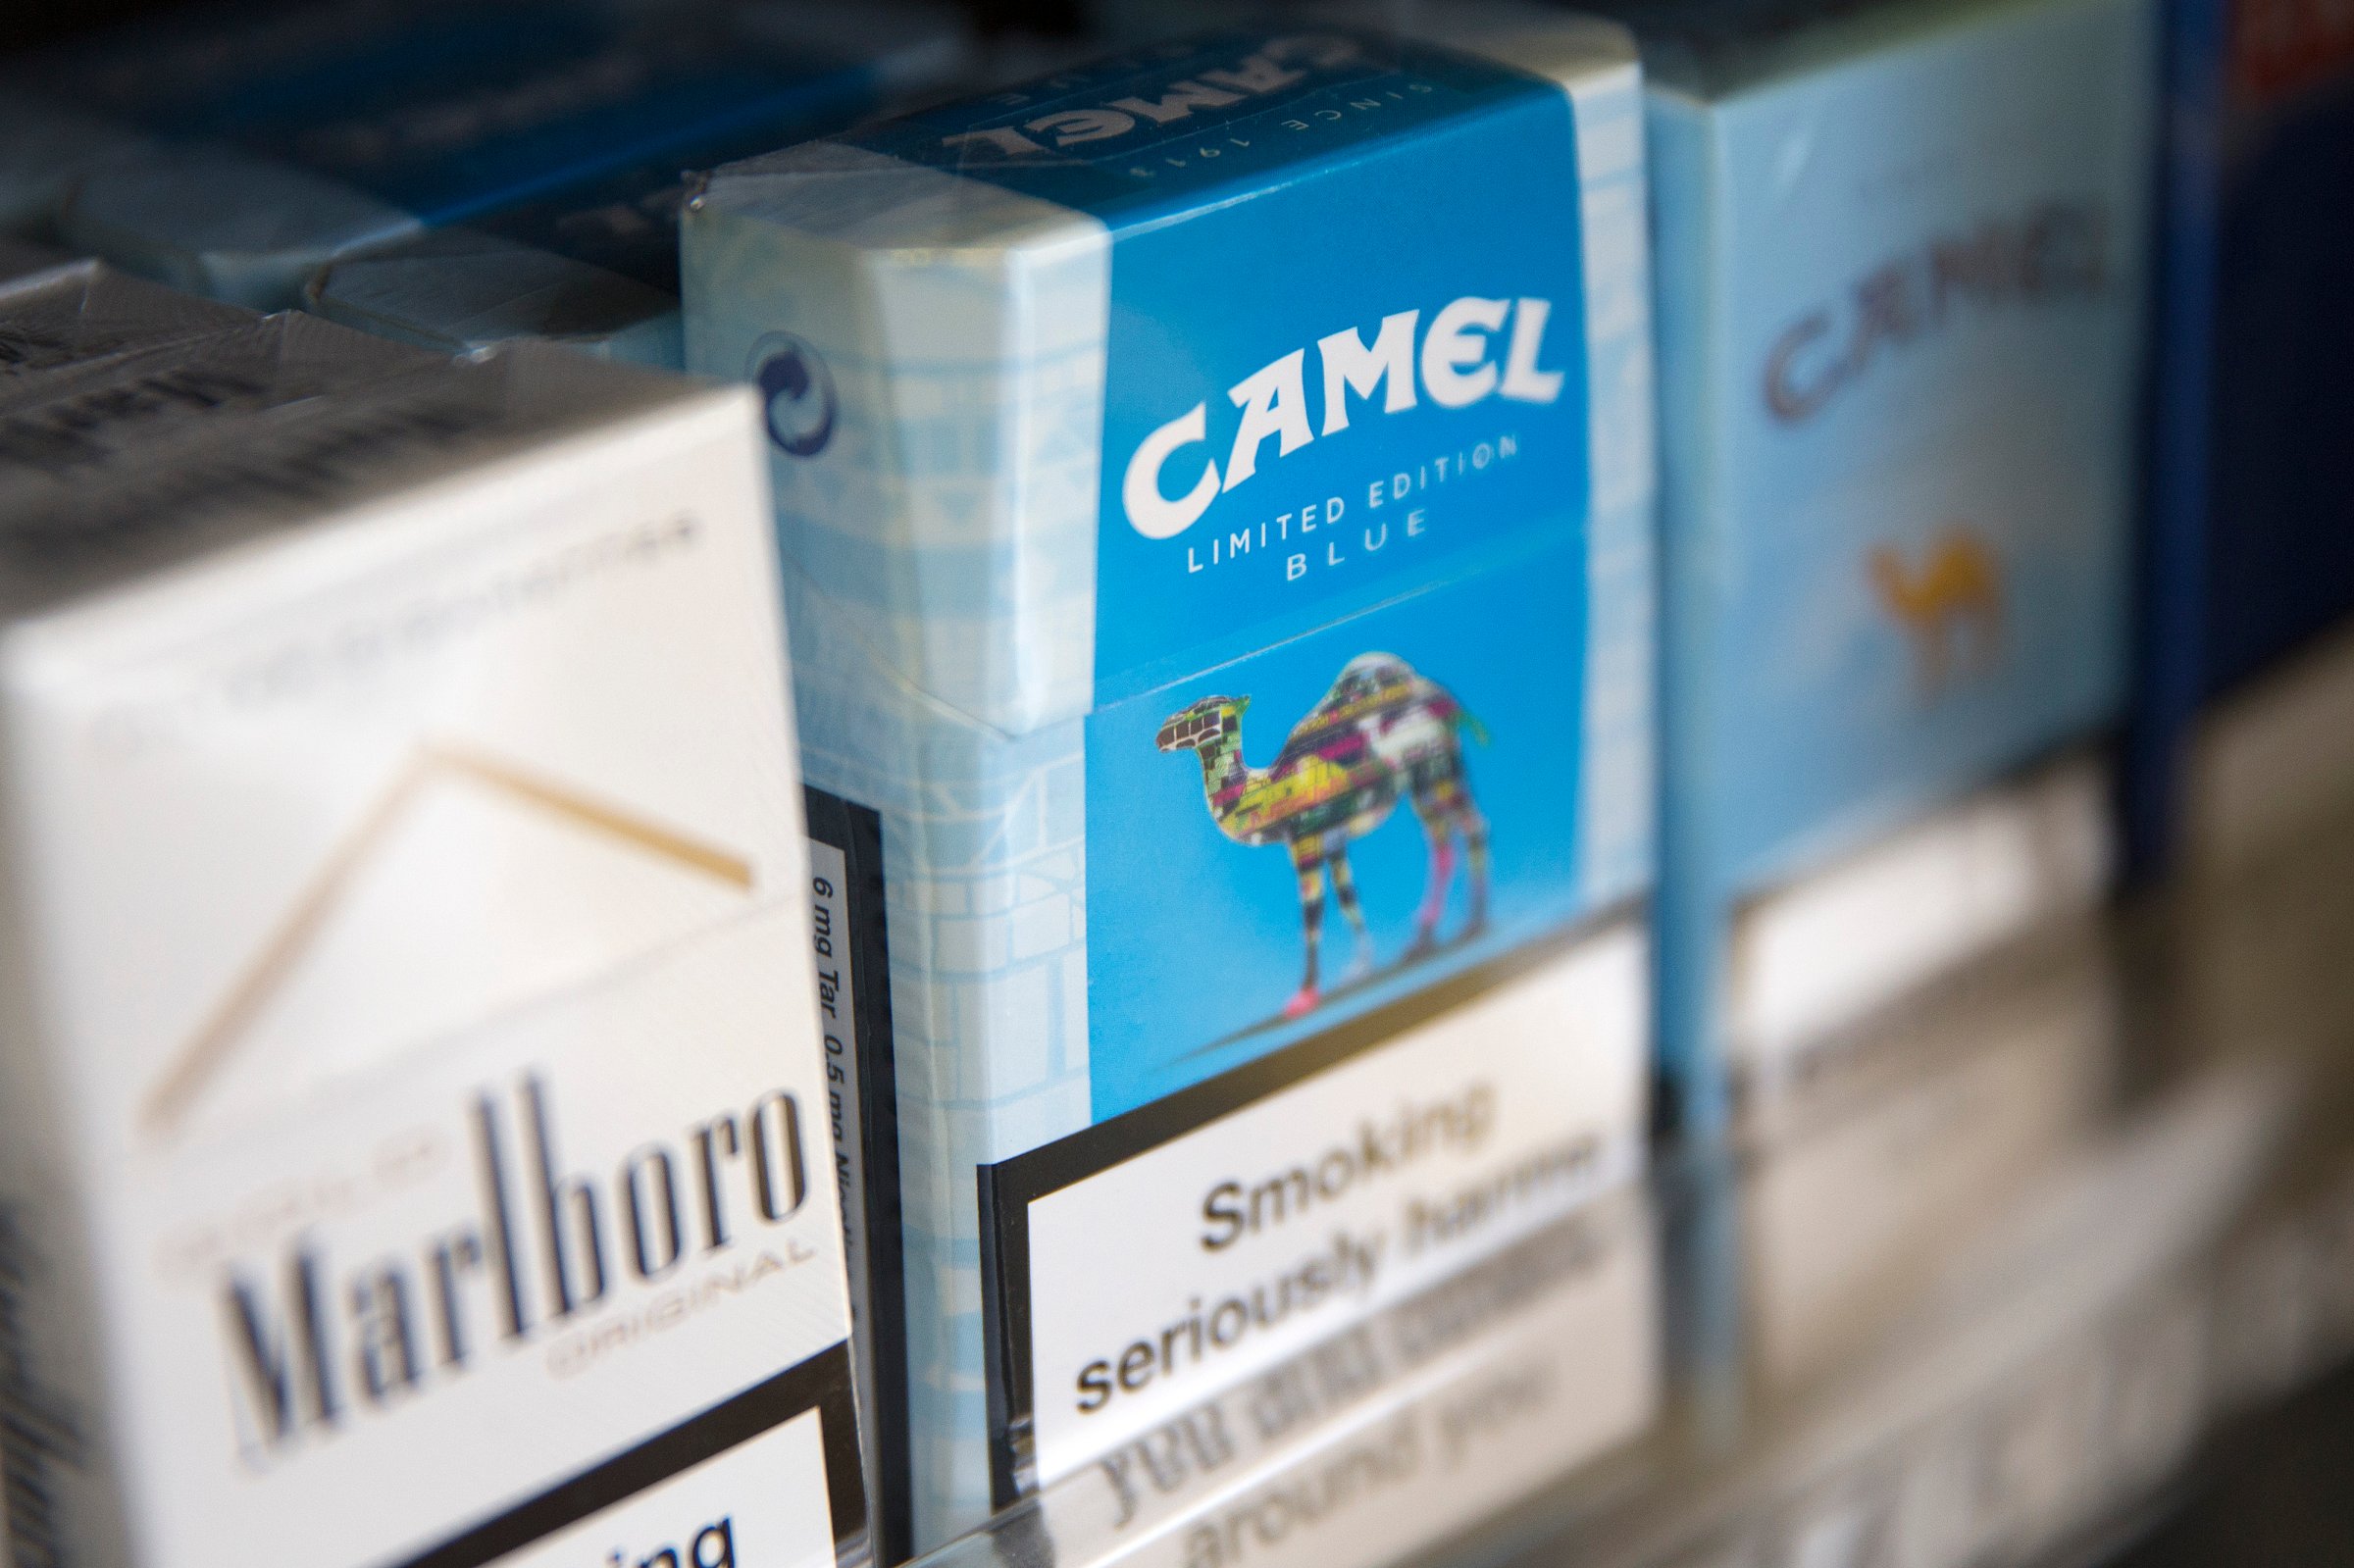 Packs of Camel cigarettes, manufactured by Reynolds American Inc., in a display rack in London on July 11, 2014.